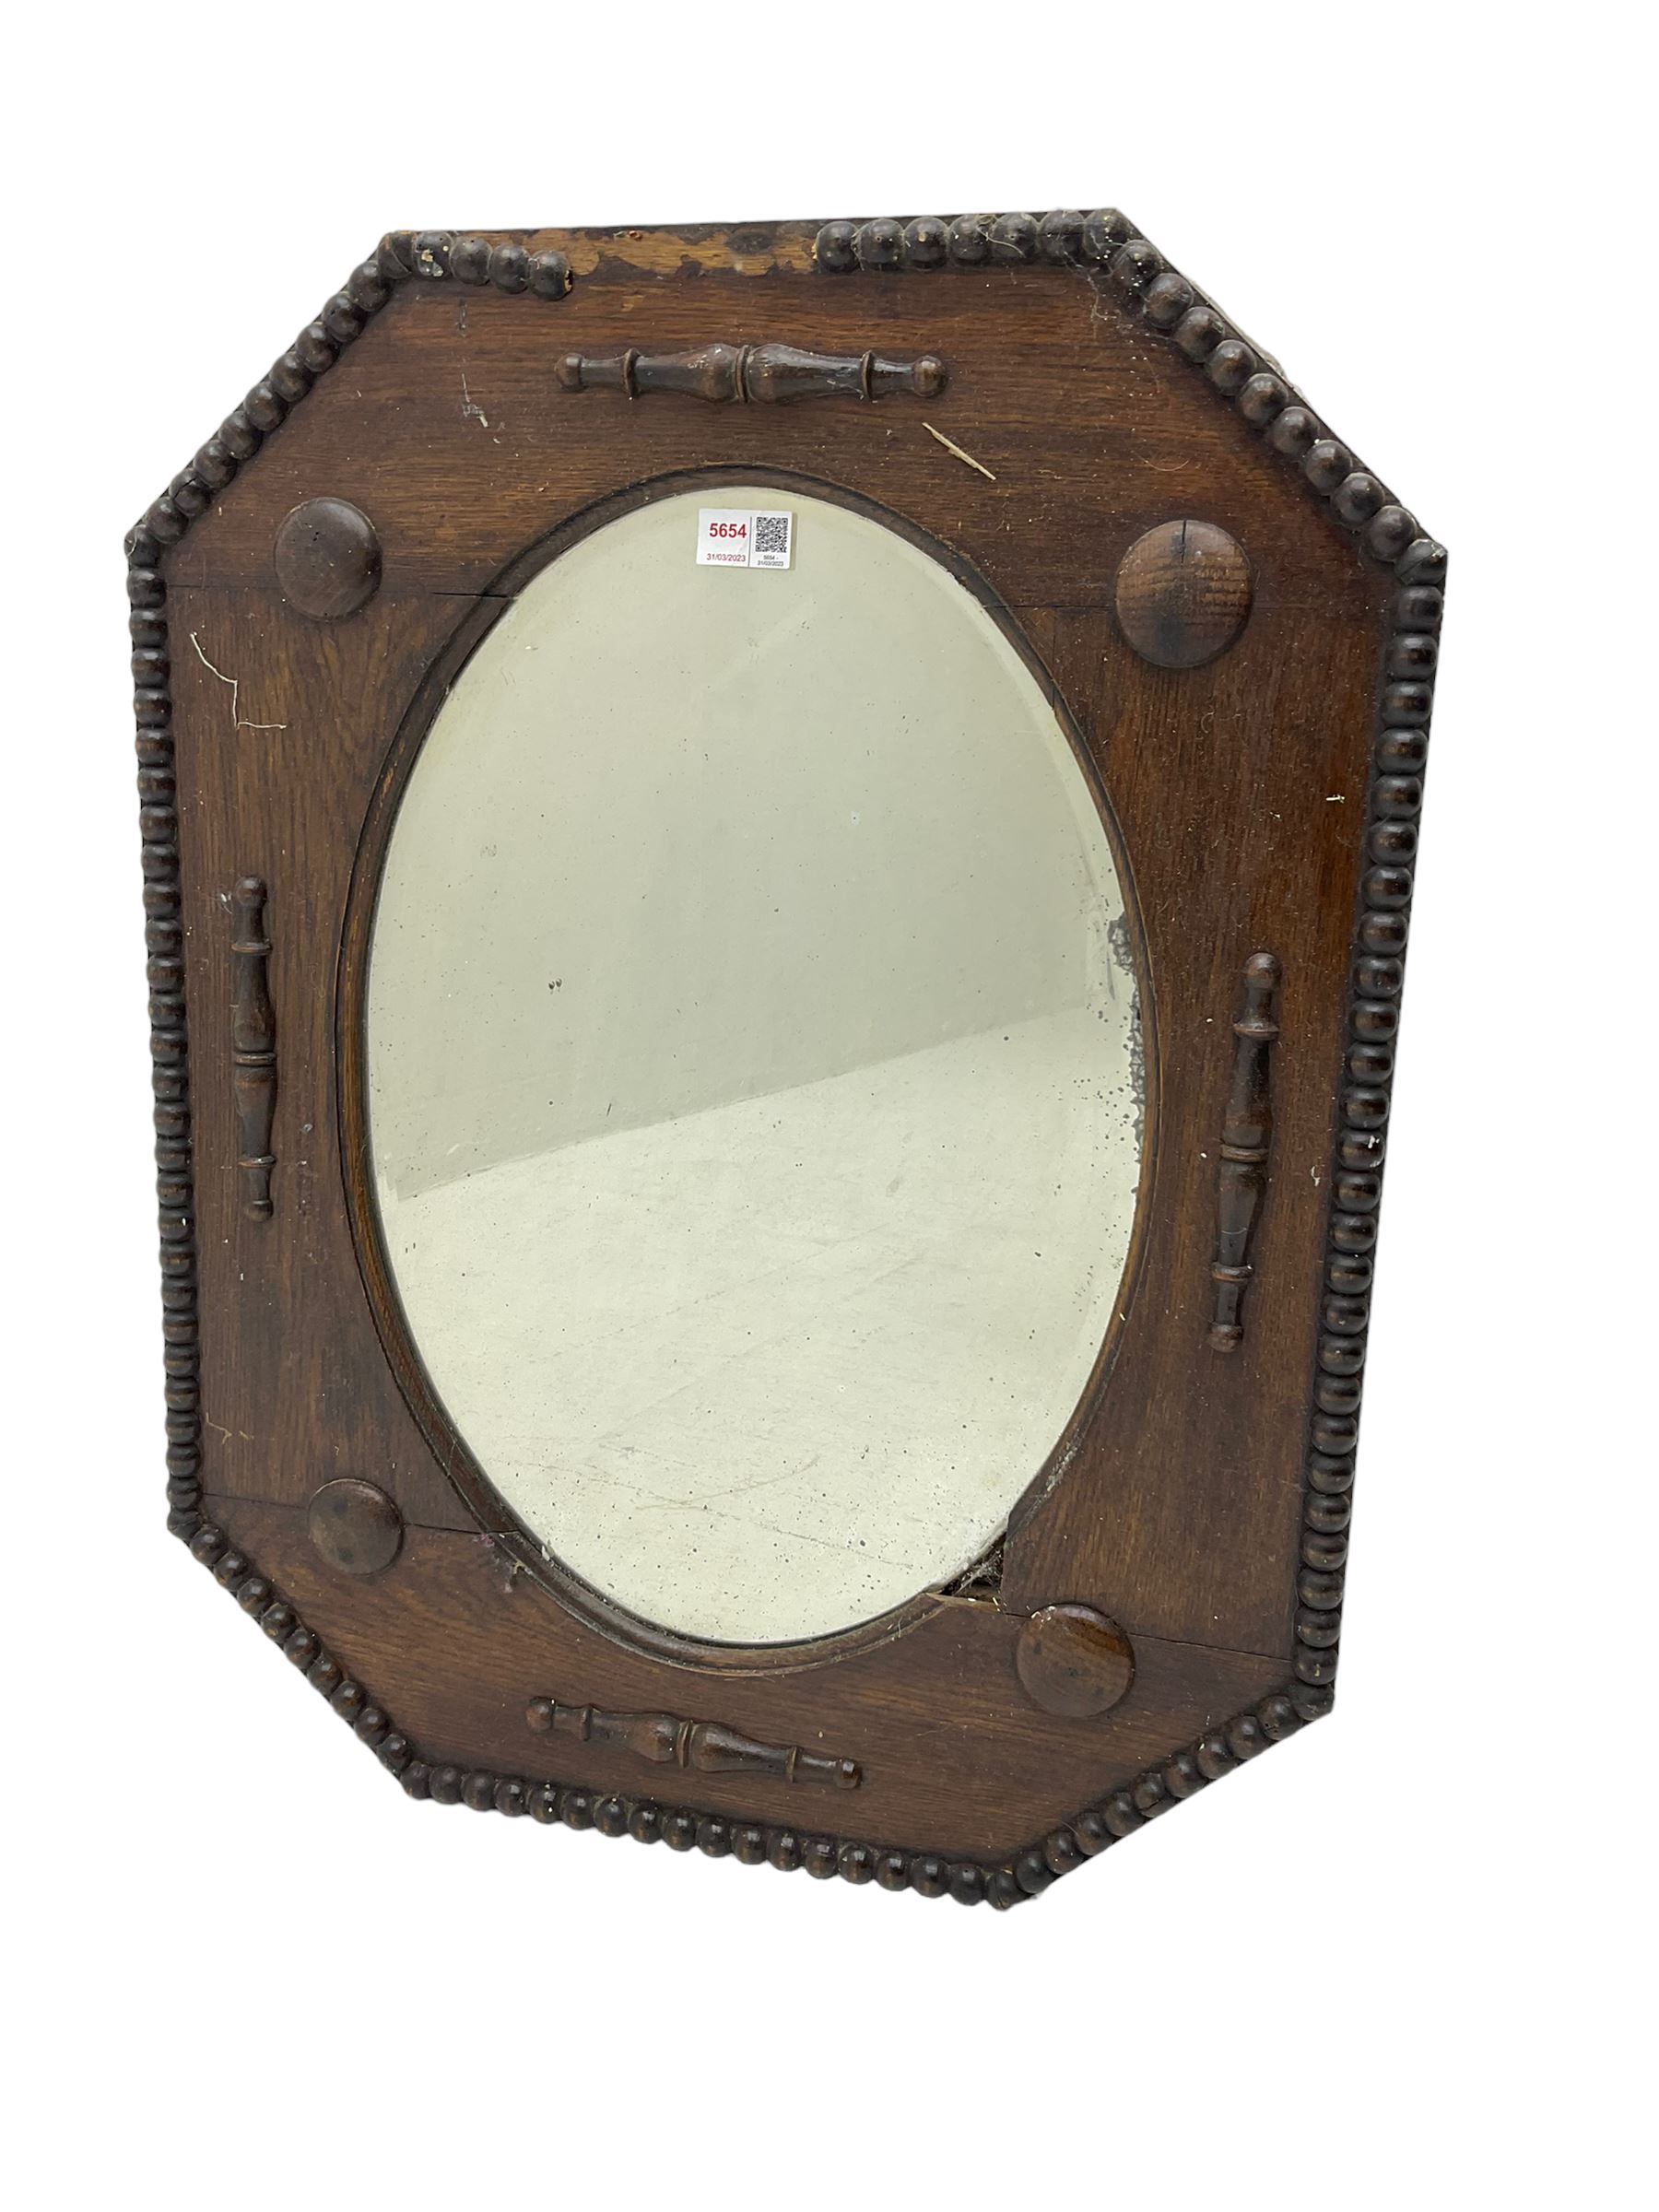 Early 20th century oak framed wall mirror - Image 3 of 4